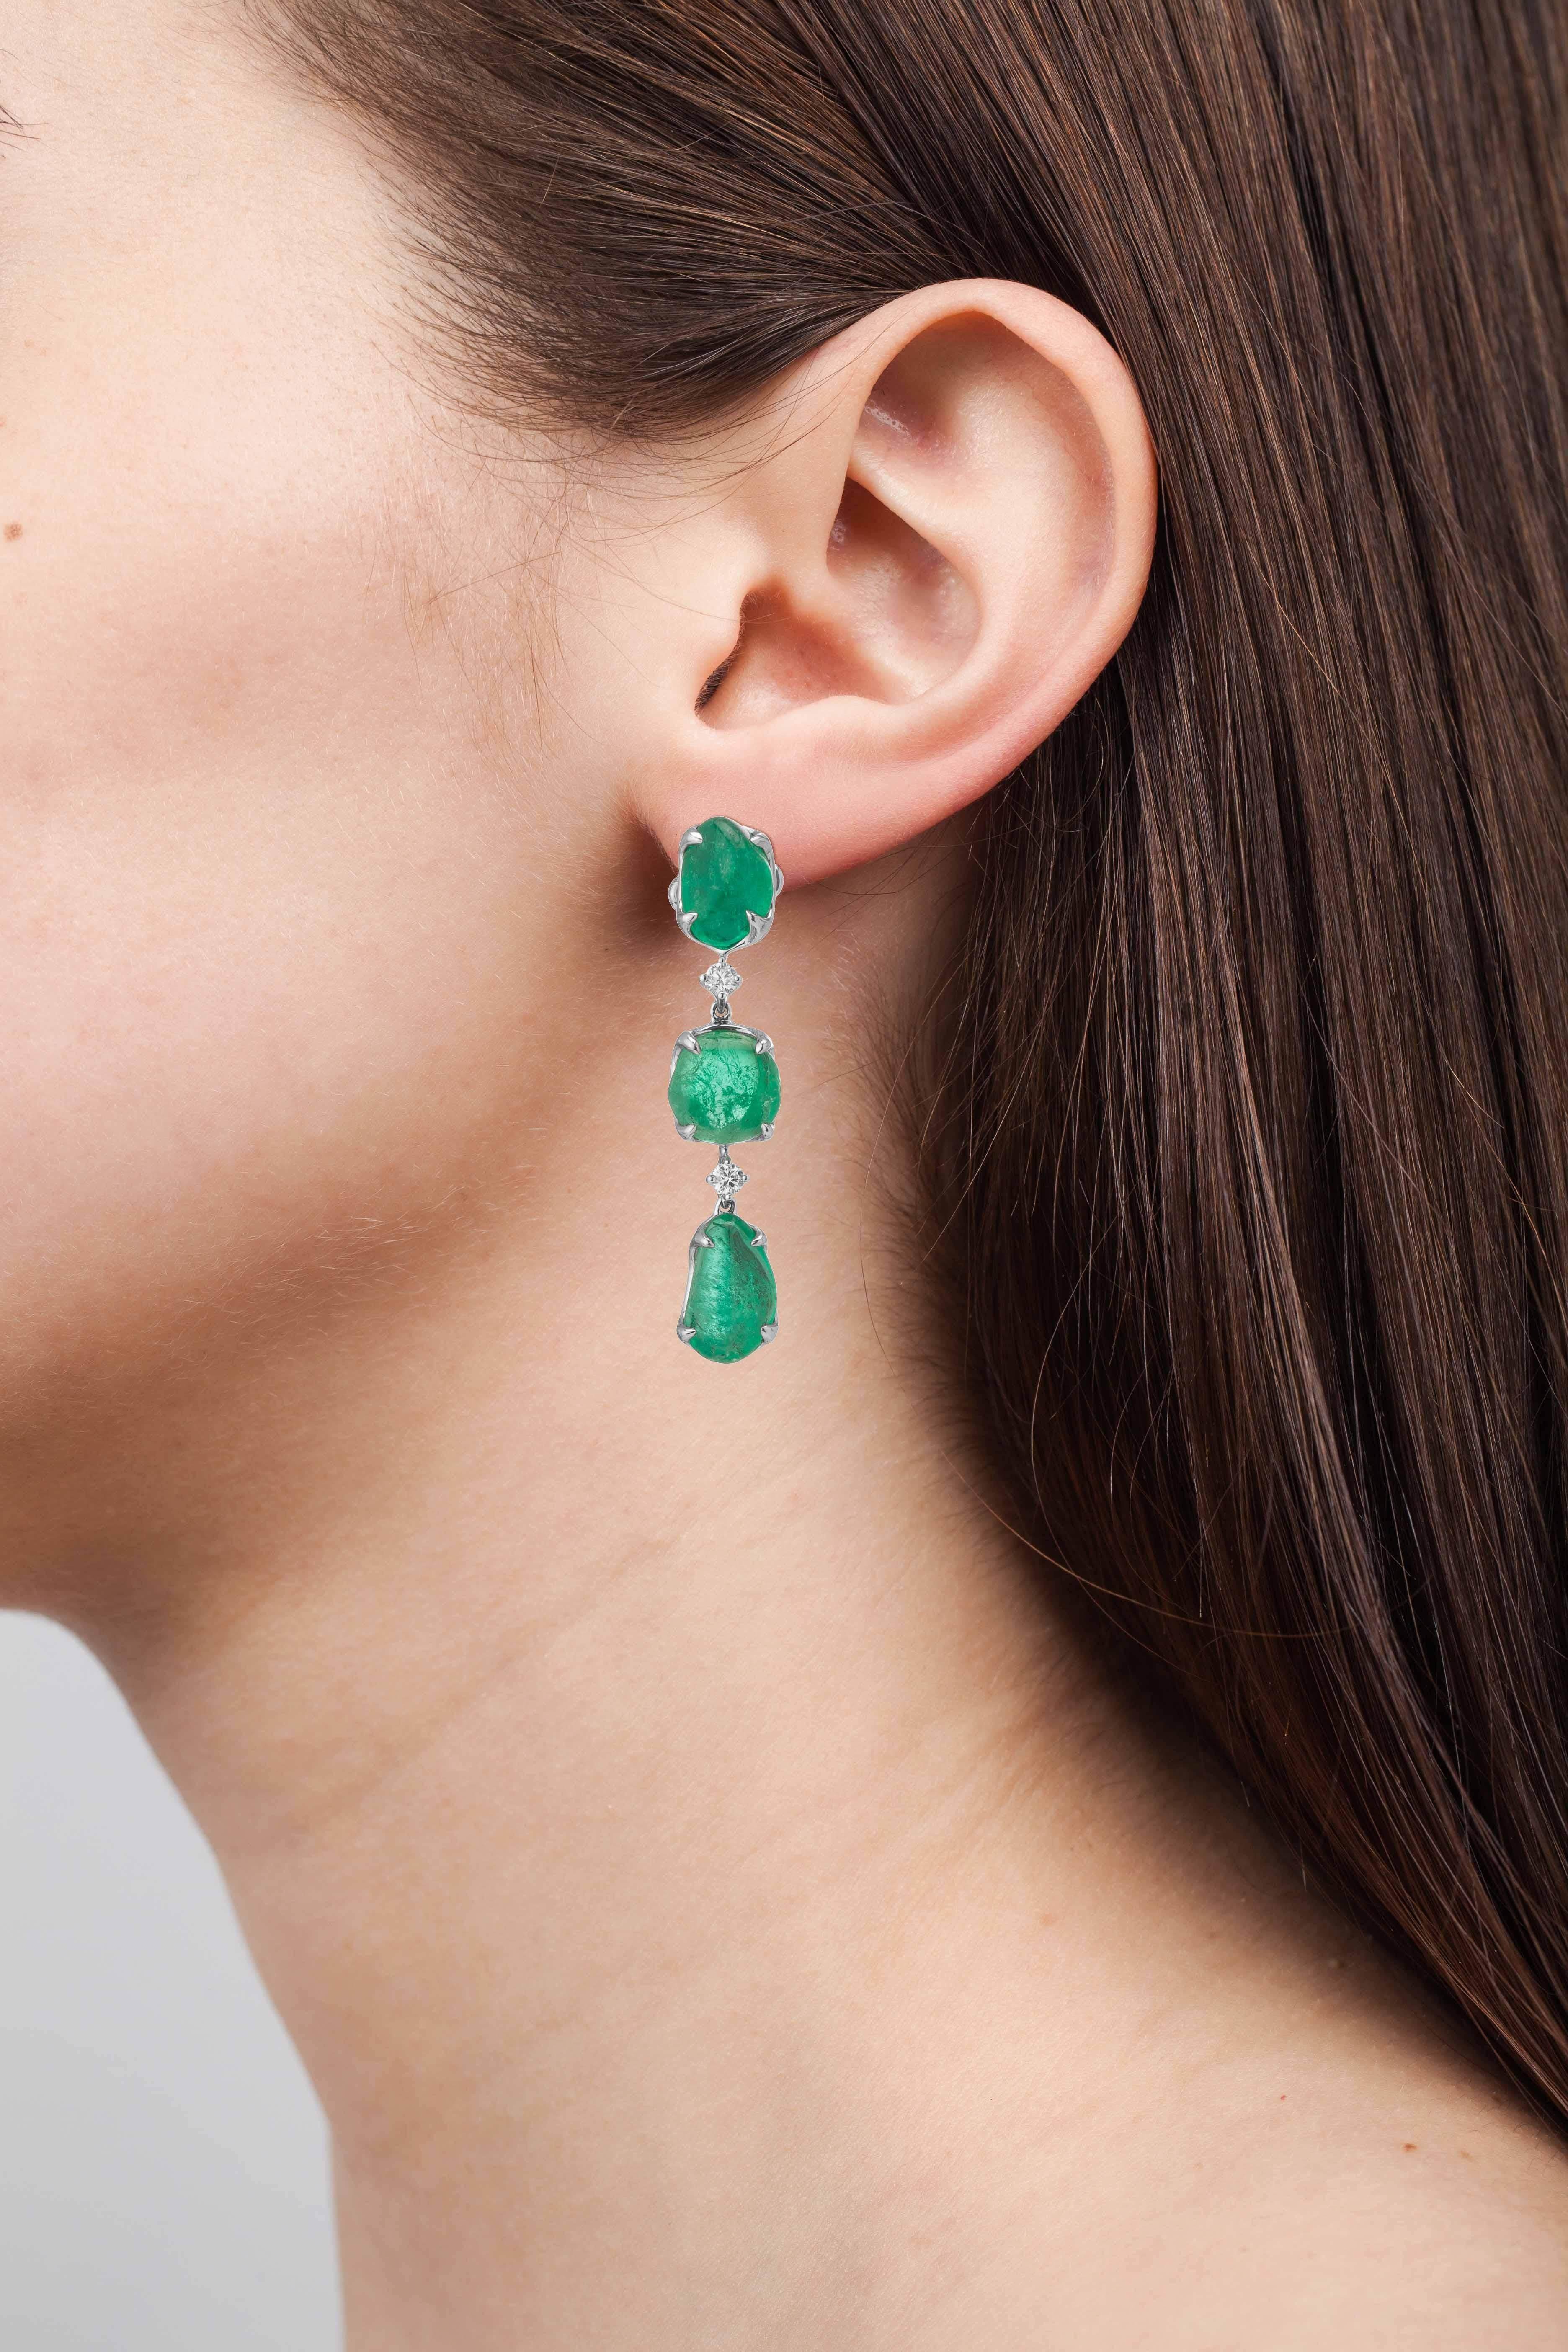 18 Karat white gold claw set drop earrings featuring 14.60 carats of Muzo Colombian emeralds, accented with 0.27 carats of diamonds. 

Muzo Emerald Colombia Heritage Muisca Earrings set with 14.60 carats Emerald.

Named in honor of the ancient